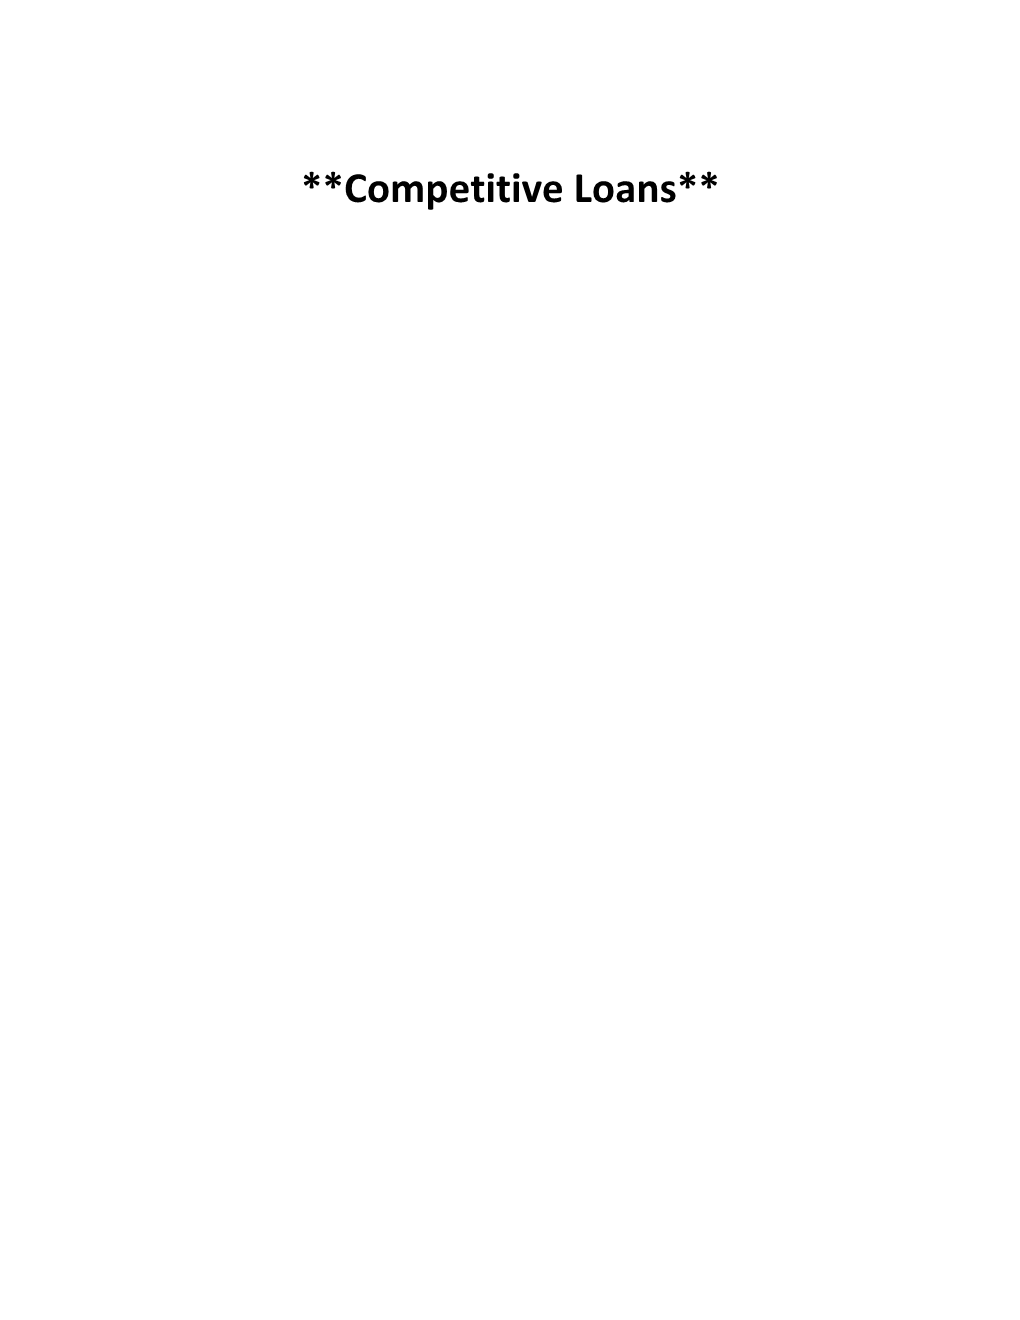 Competitive Loans